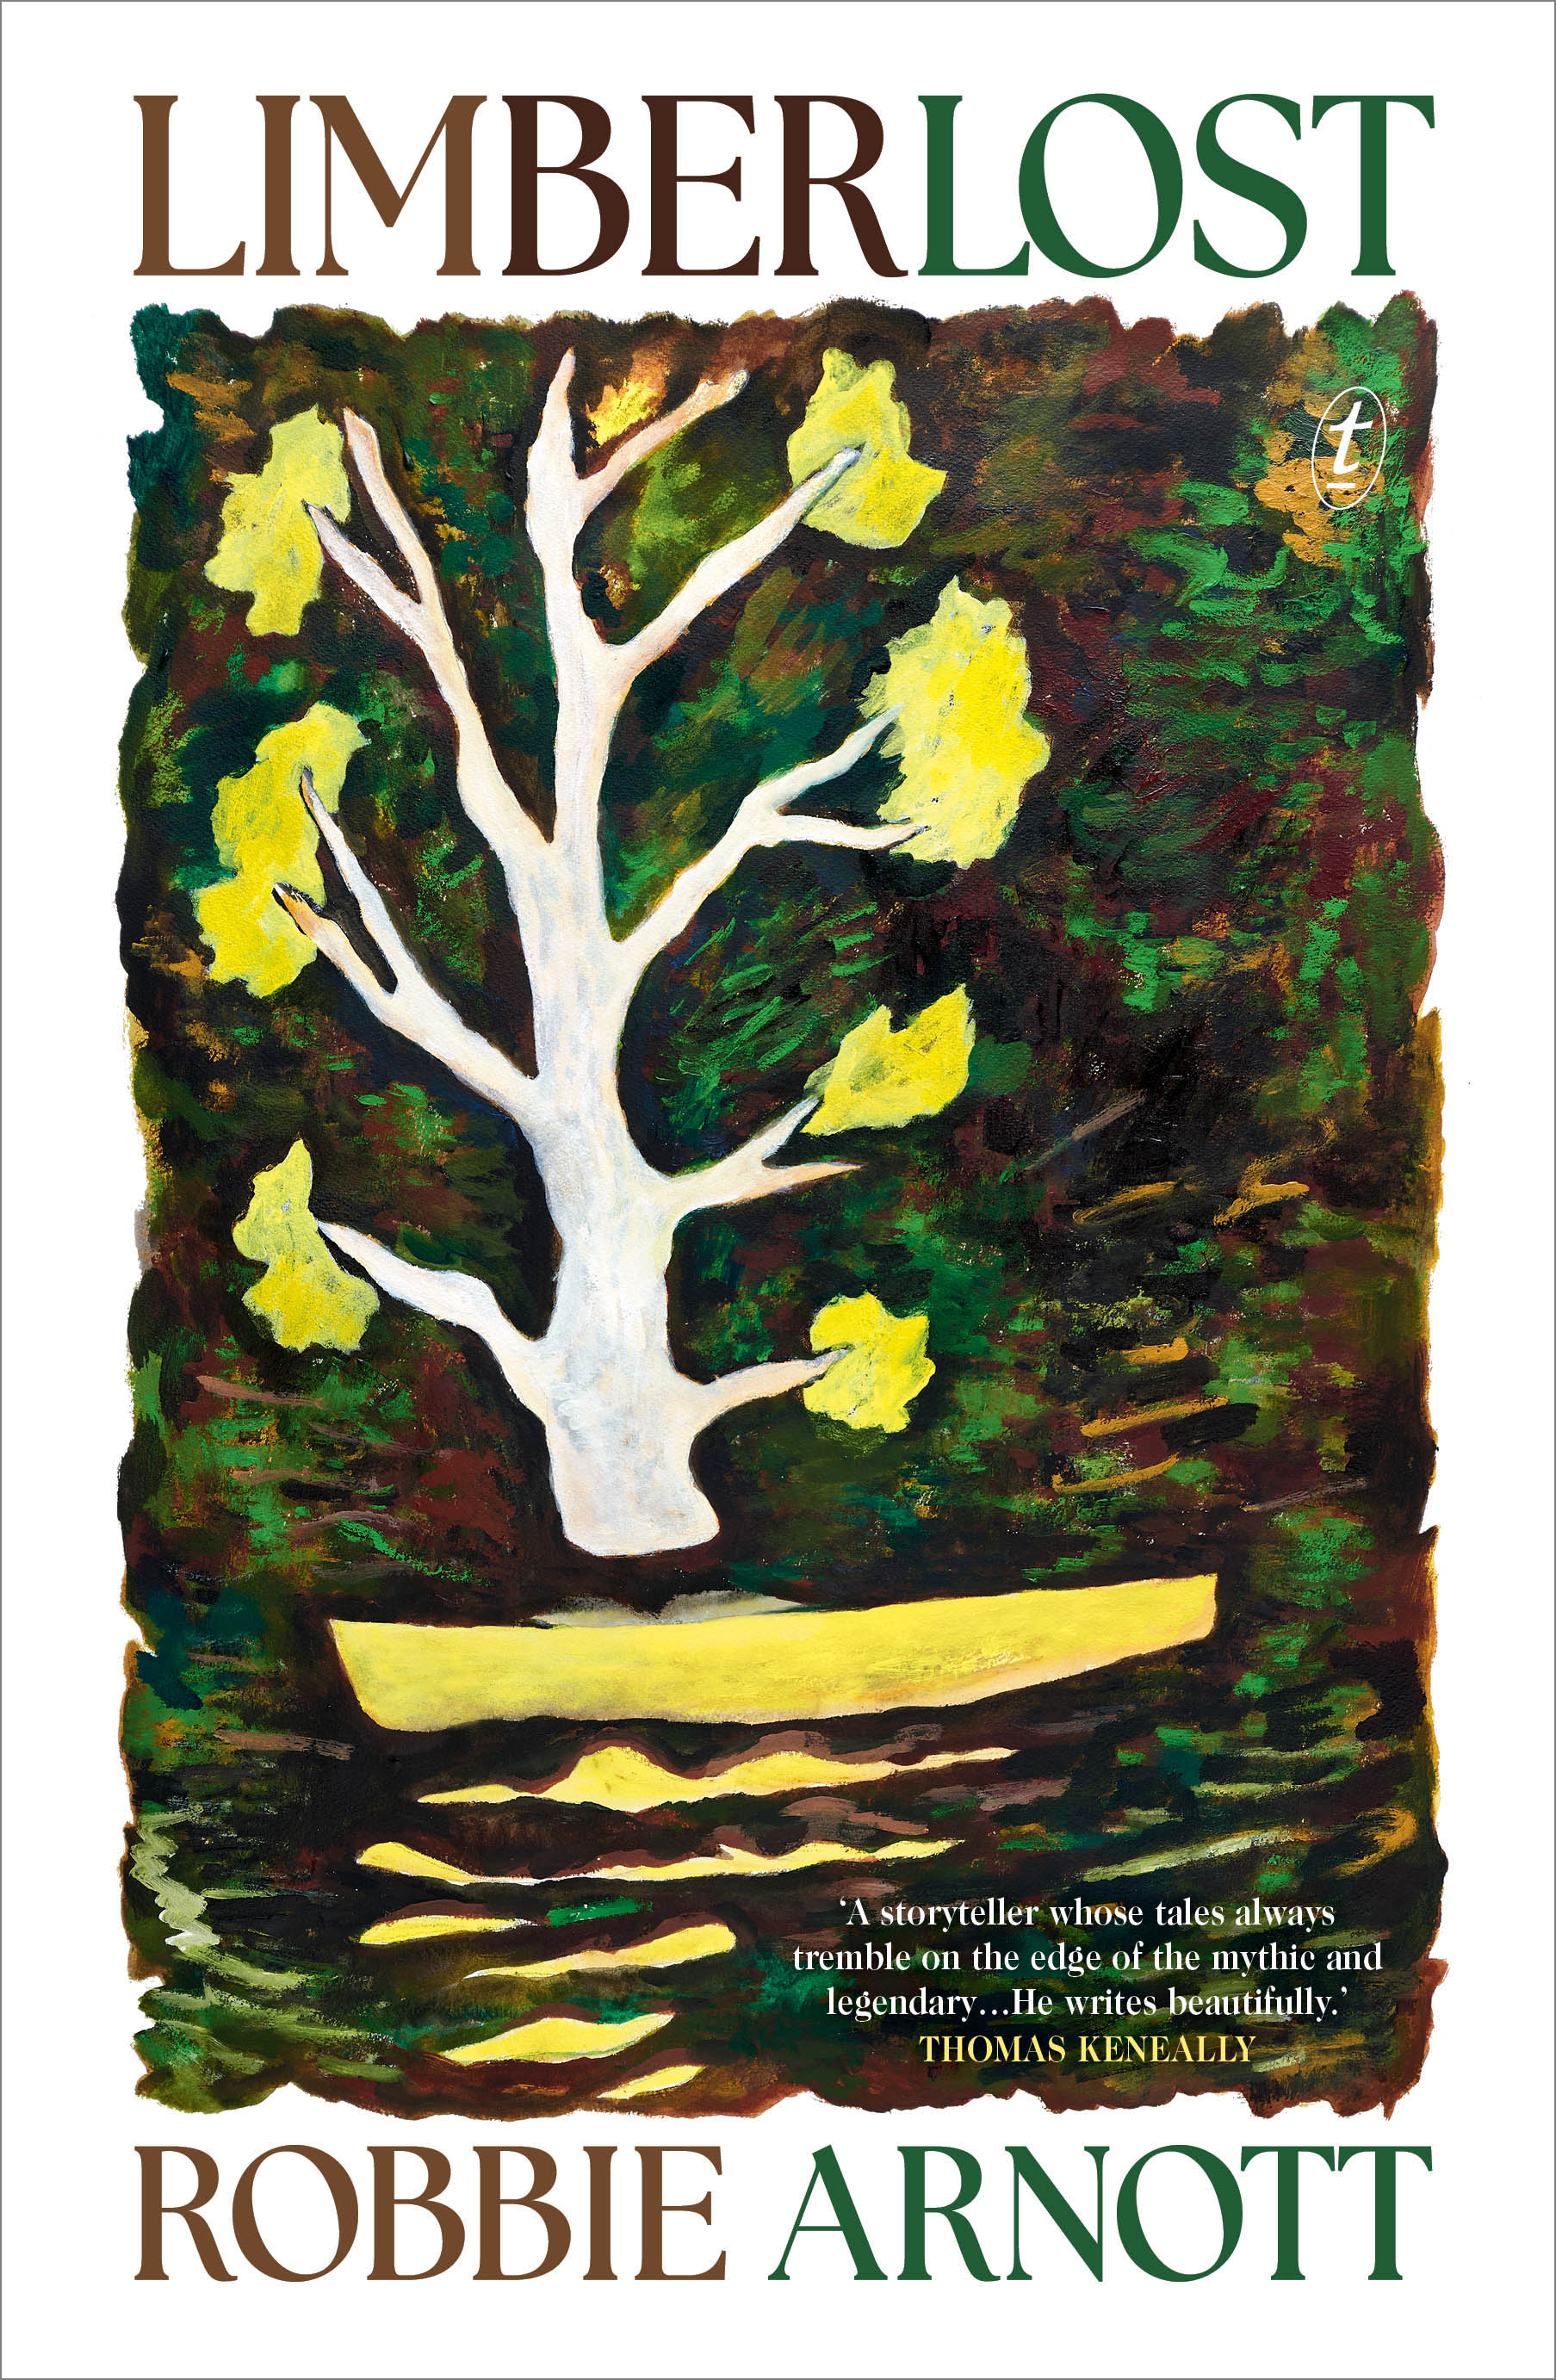 A book cover showing an illustration of a tree